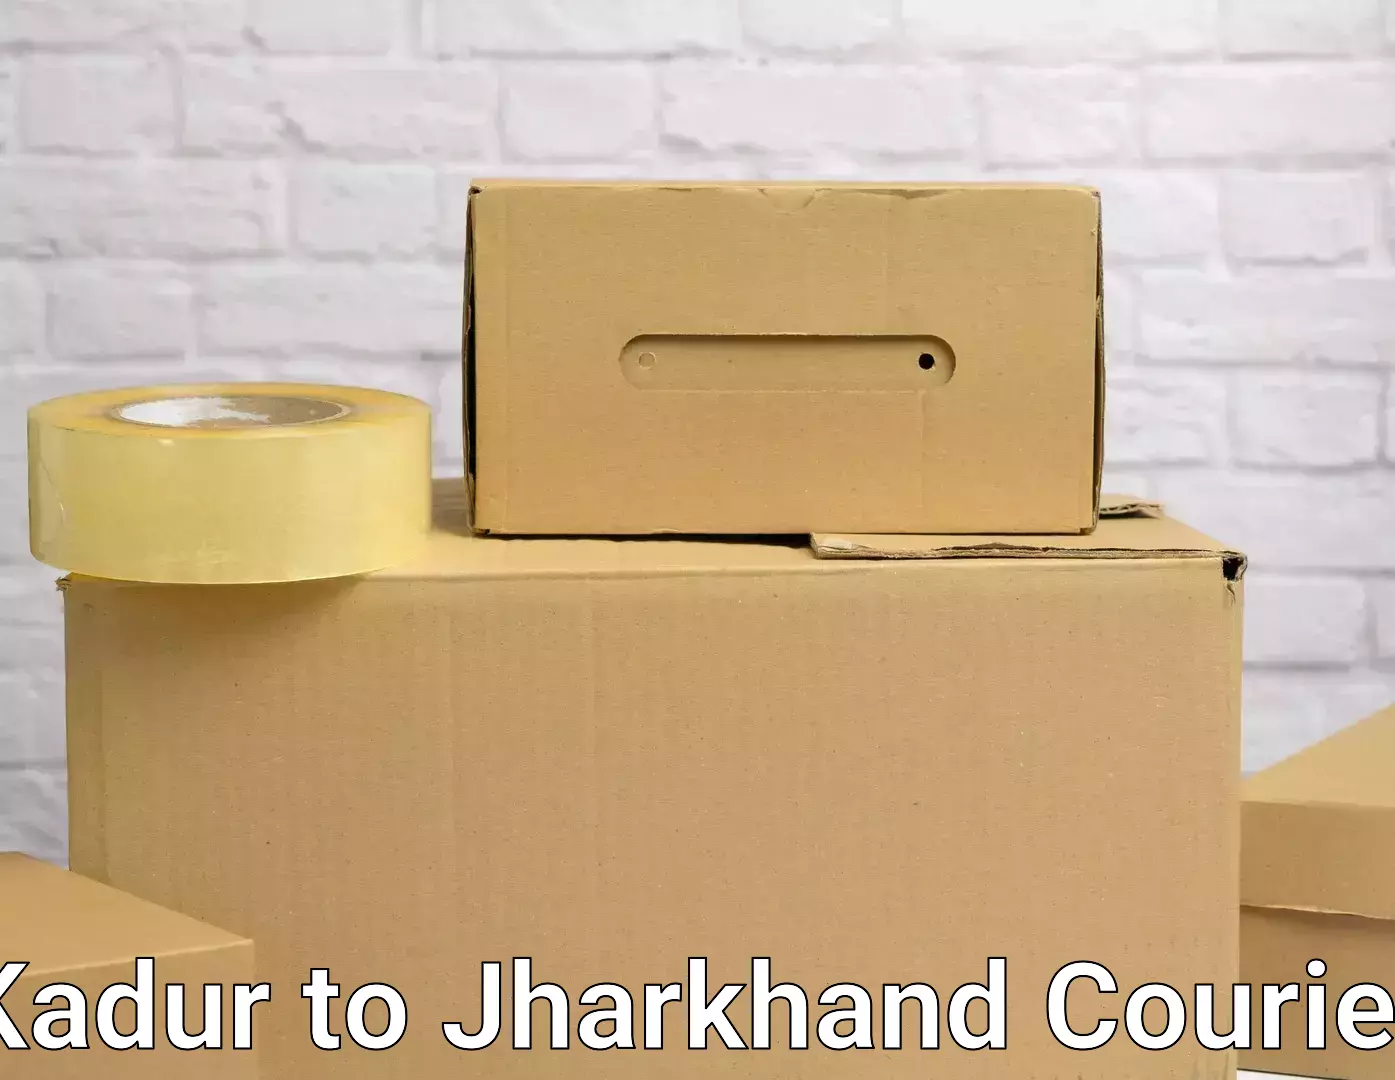 Furniture delivery service Kadur to Jharkhand